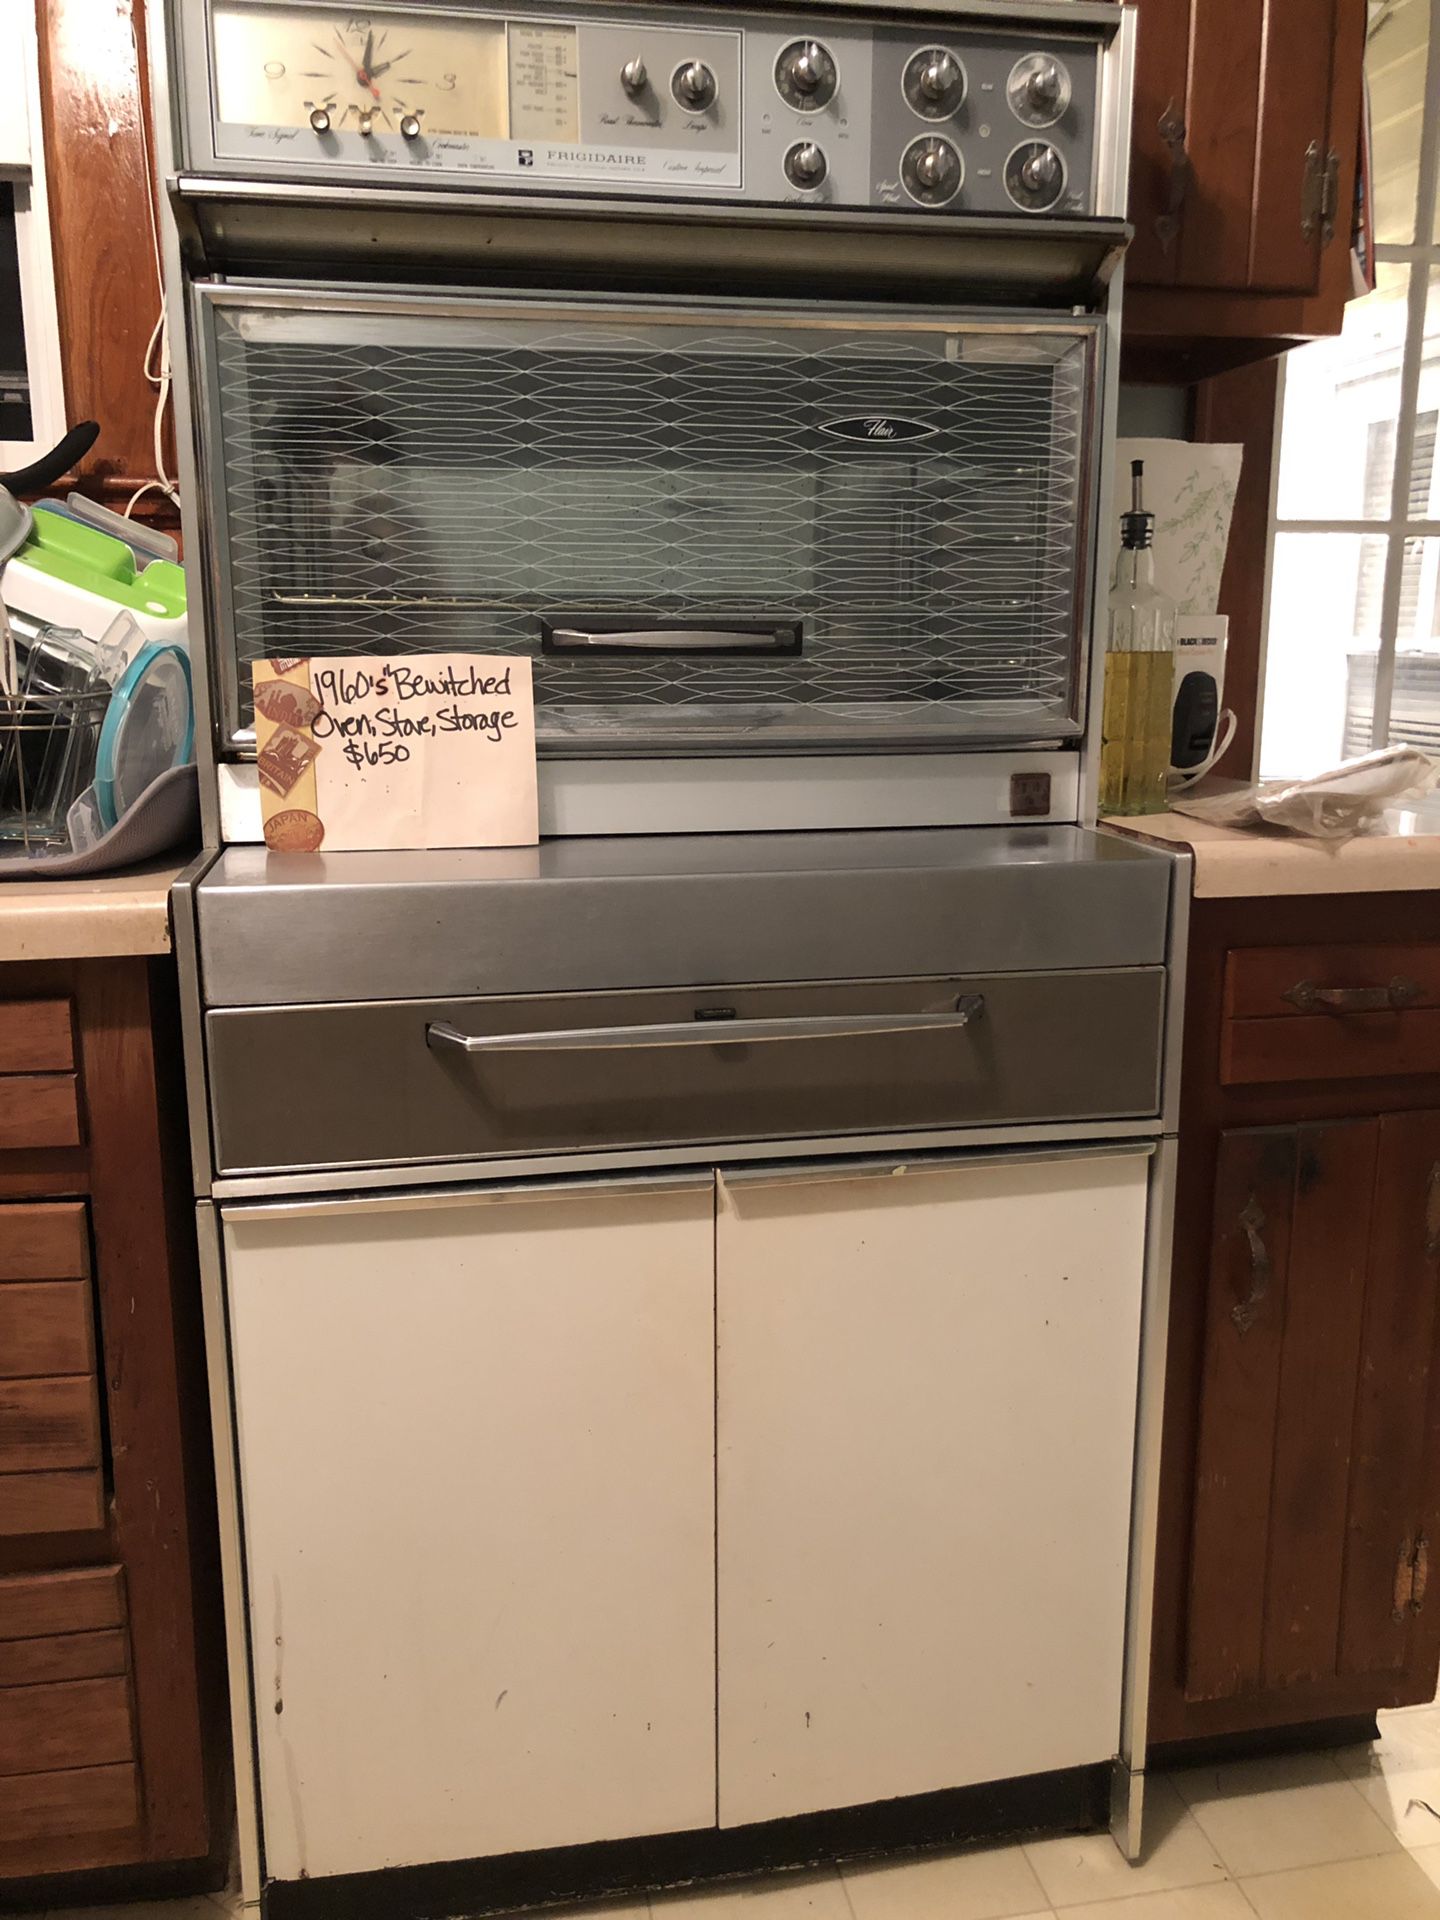 1960 Bewitched Oven, Stove, Storage!! $650.00 OBO